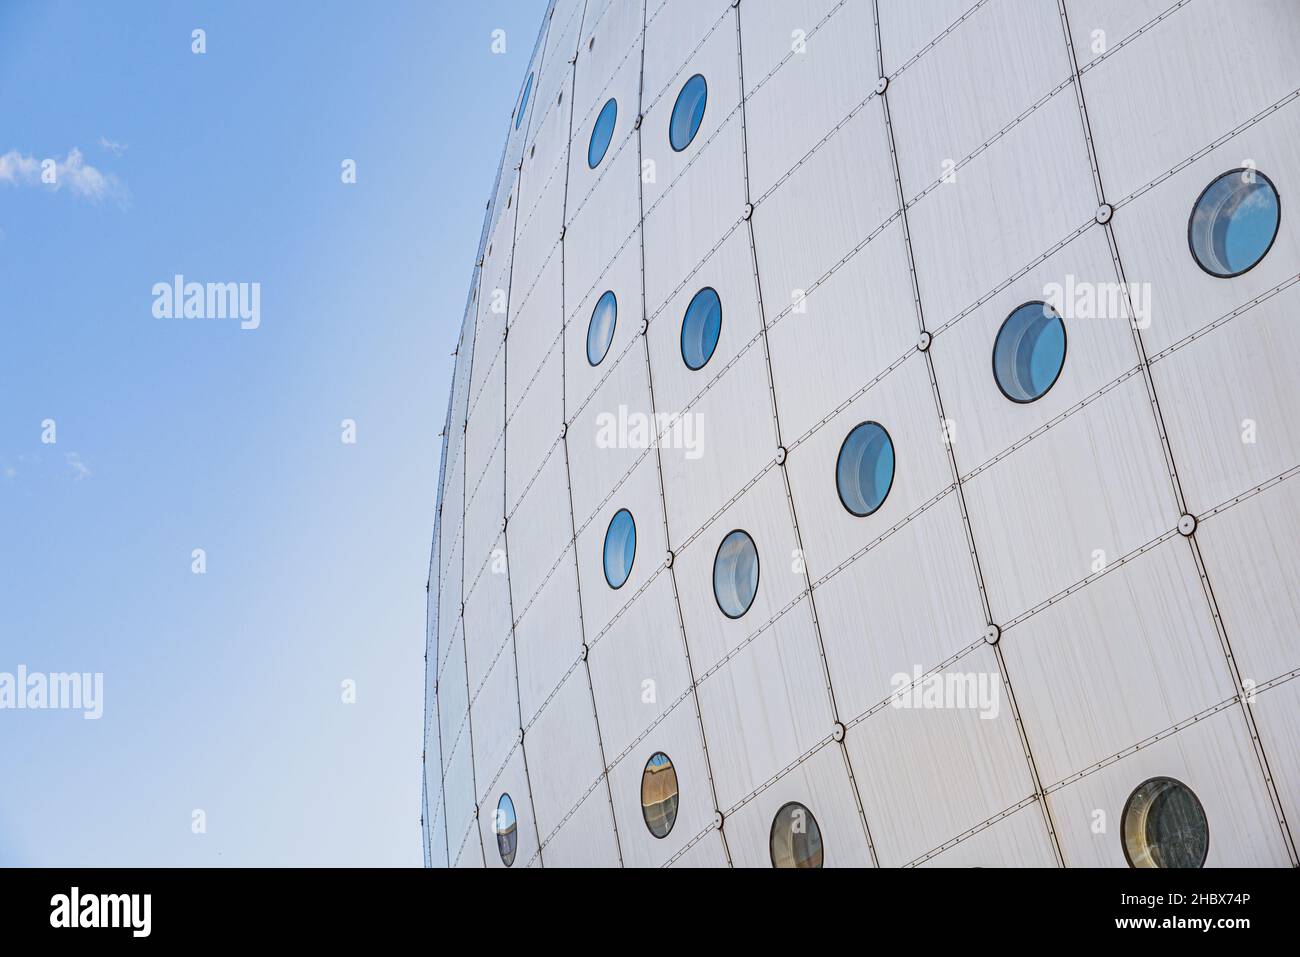 Facade detail of contemporary spherical building with circular windows or portholes shows a quirk architectural shape that conveys a financial concept Stock Photo